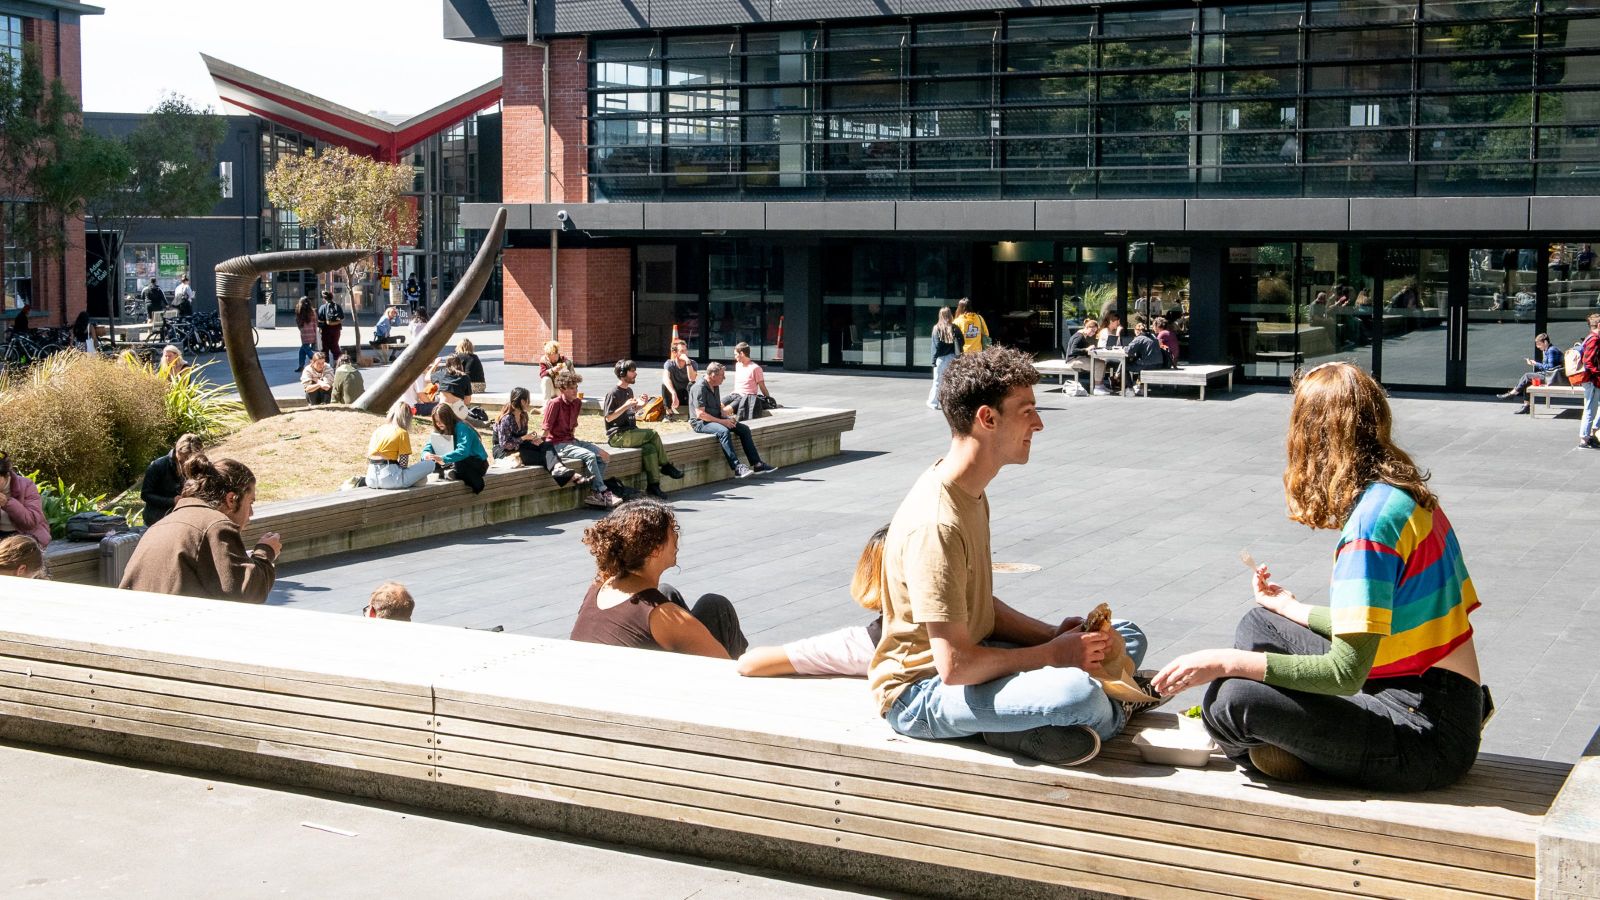 Beaglehold courtyard at Kelburn campus on a sunny day, with groups of students sitting, chatting, eating lunch.